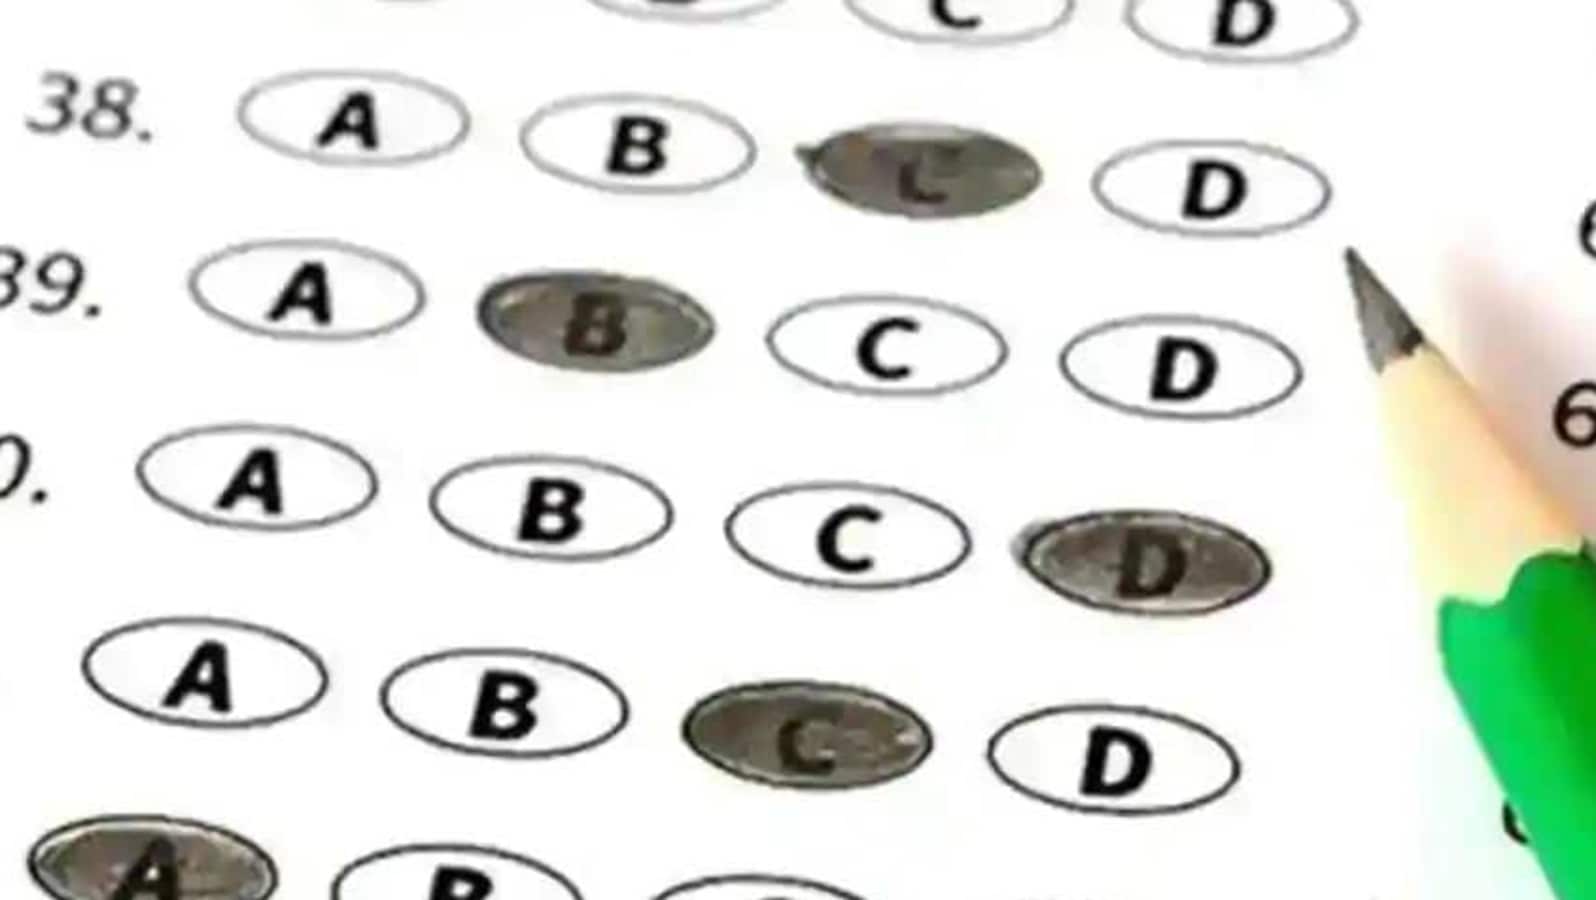 JEE main final answer key out for session 3 exam, results expected soon